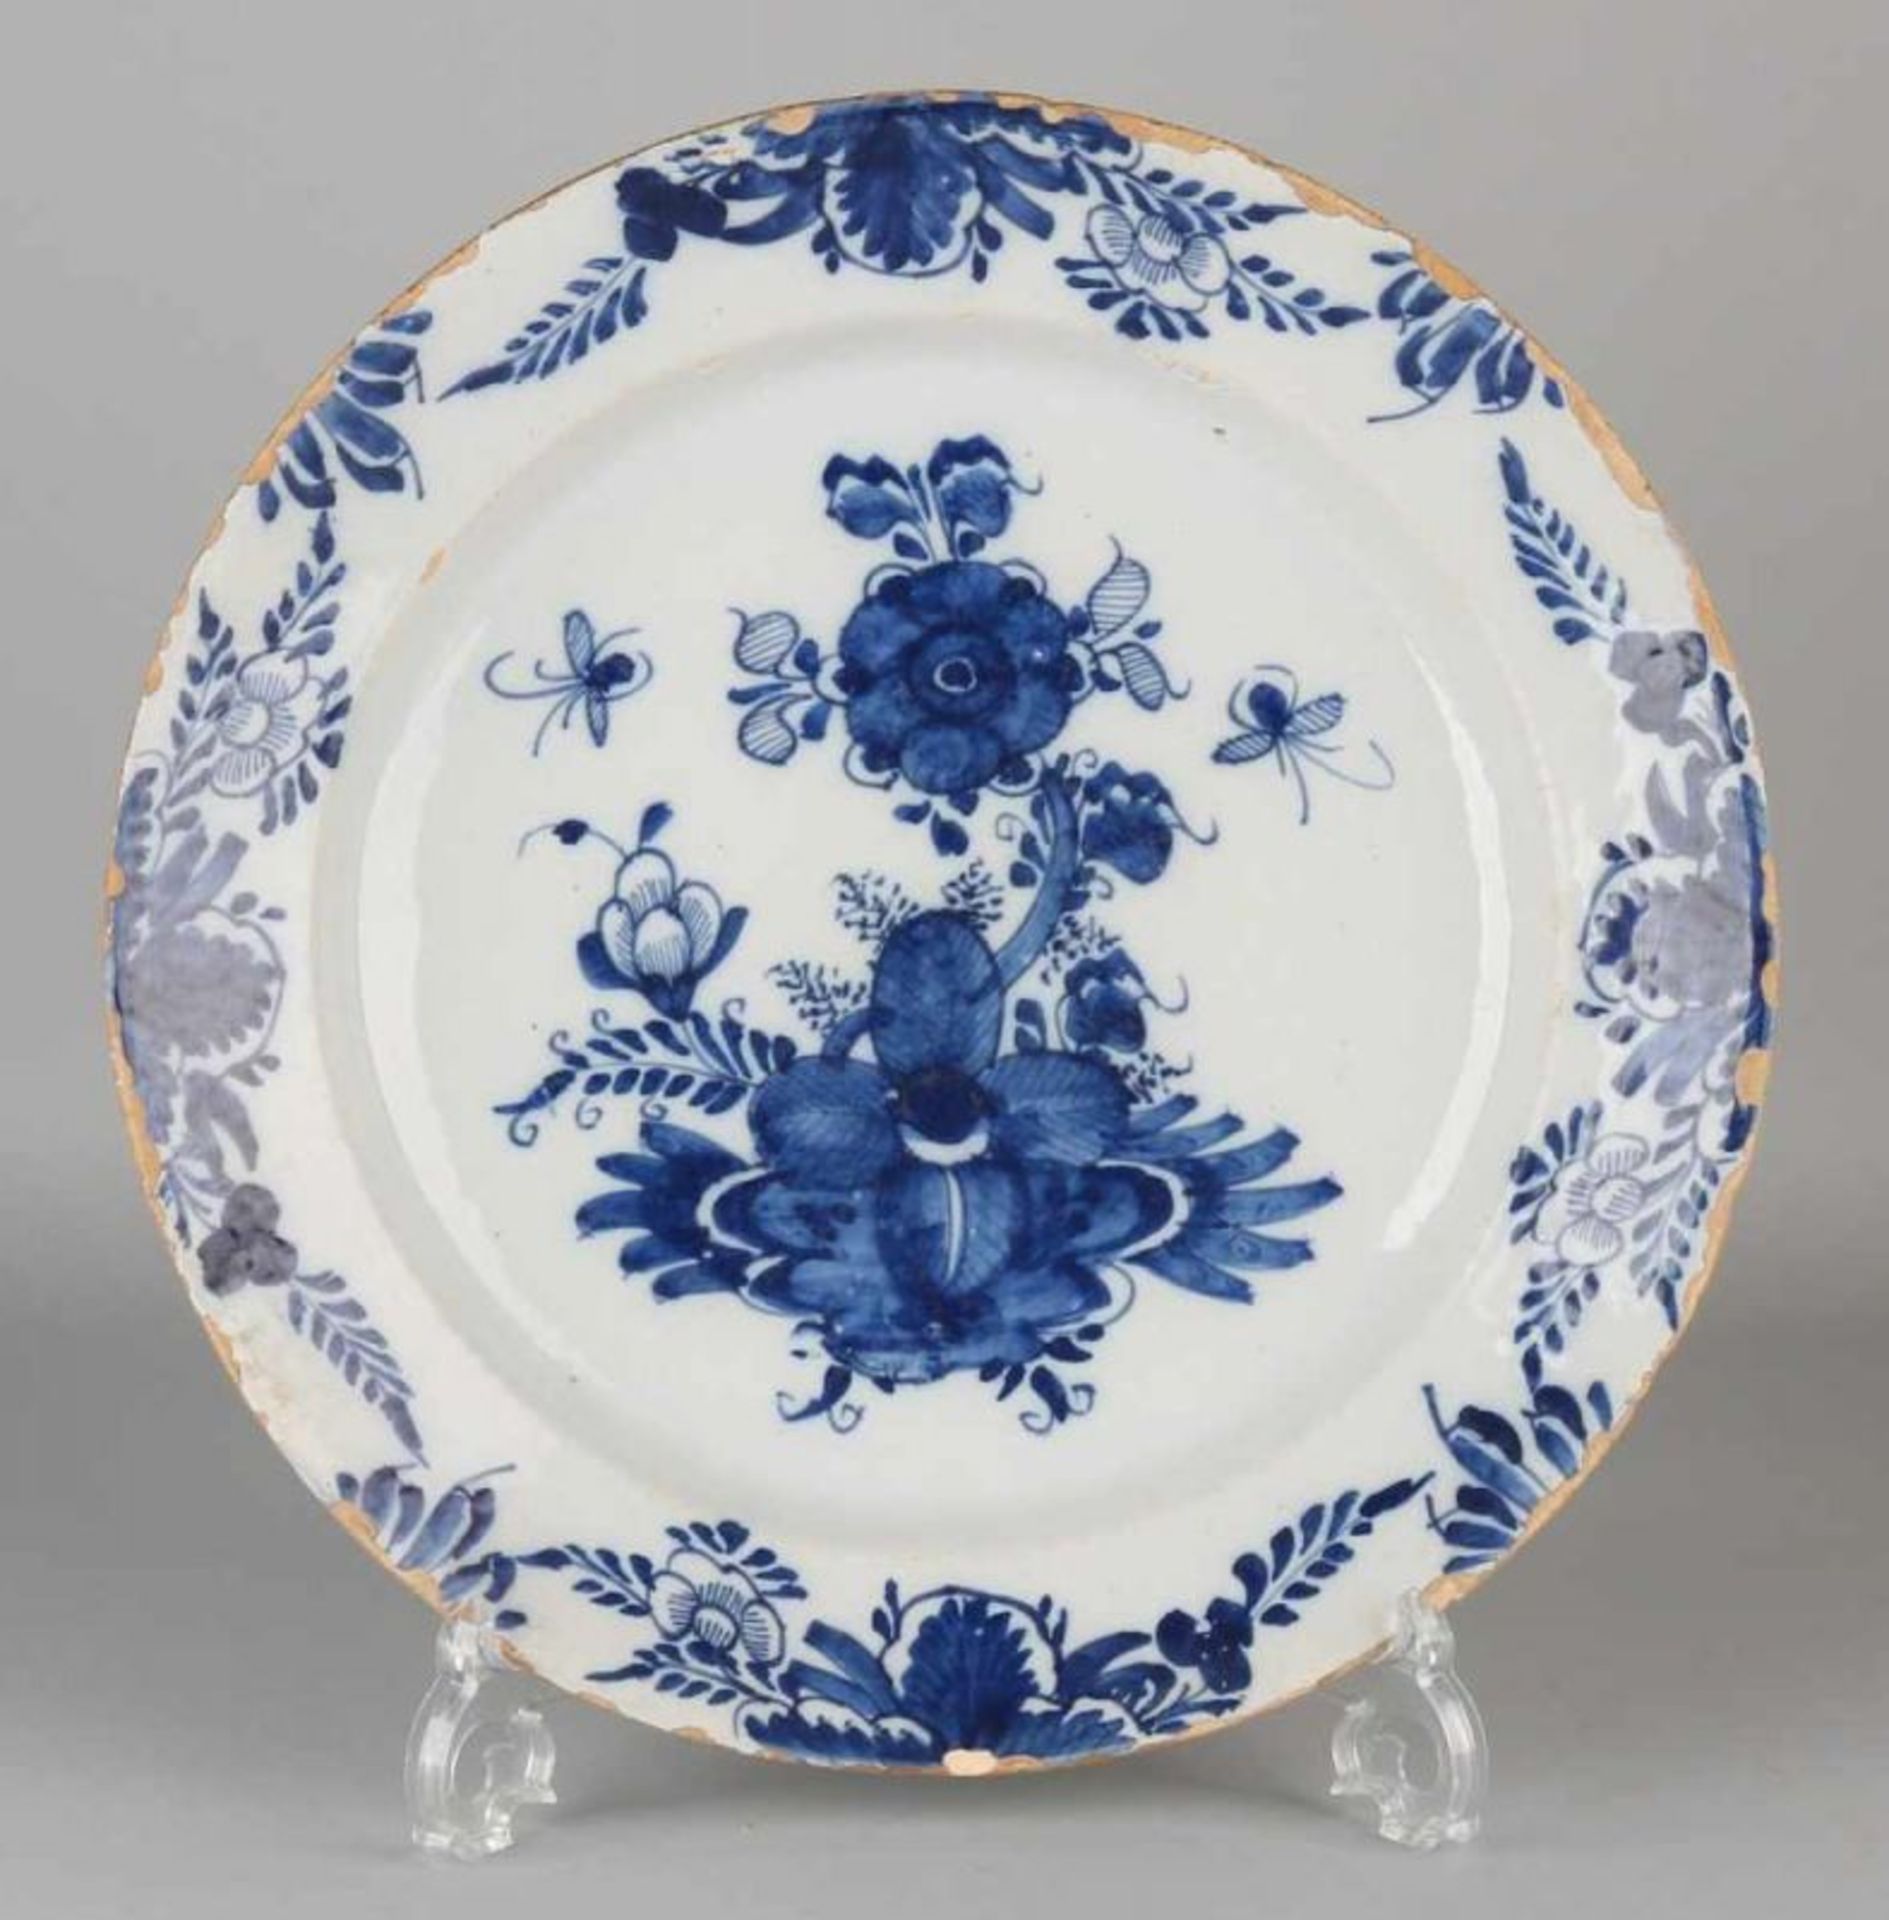 Large 18th century Delft Fayence decorative plate with floral decoration. "The Klaauw. Slight